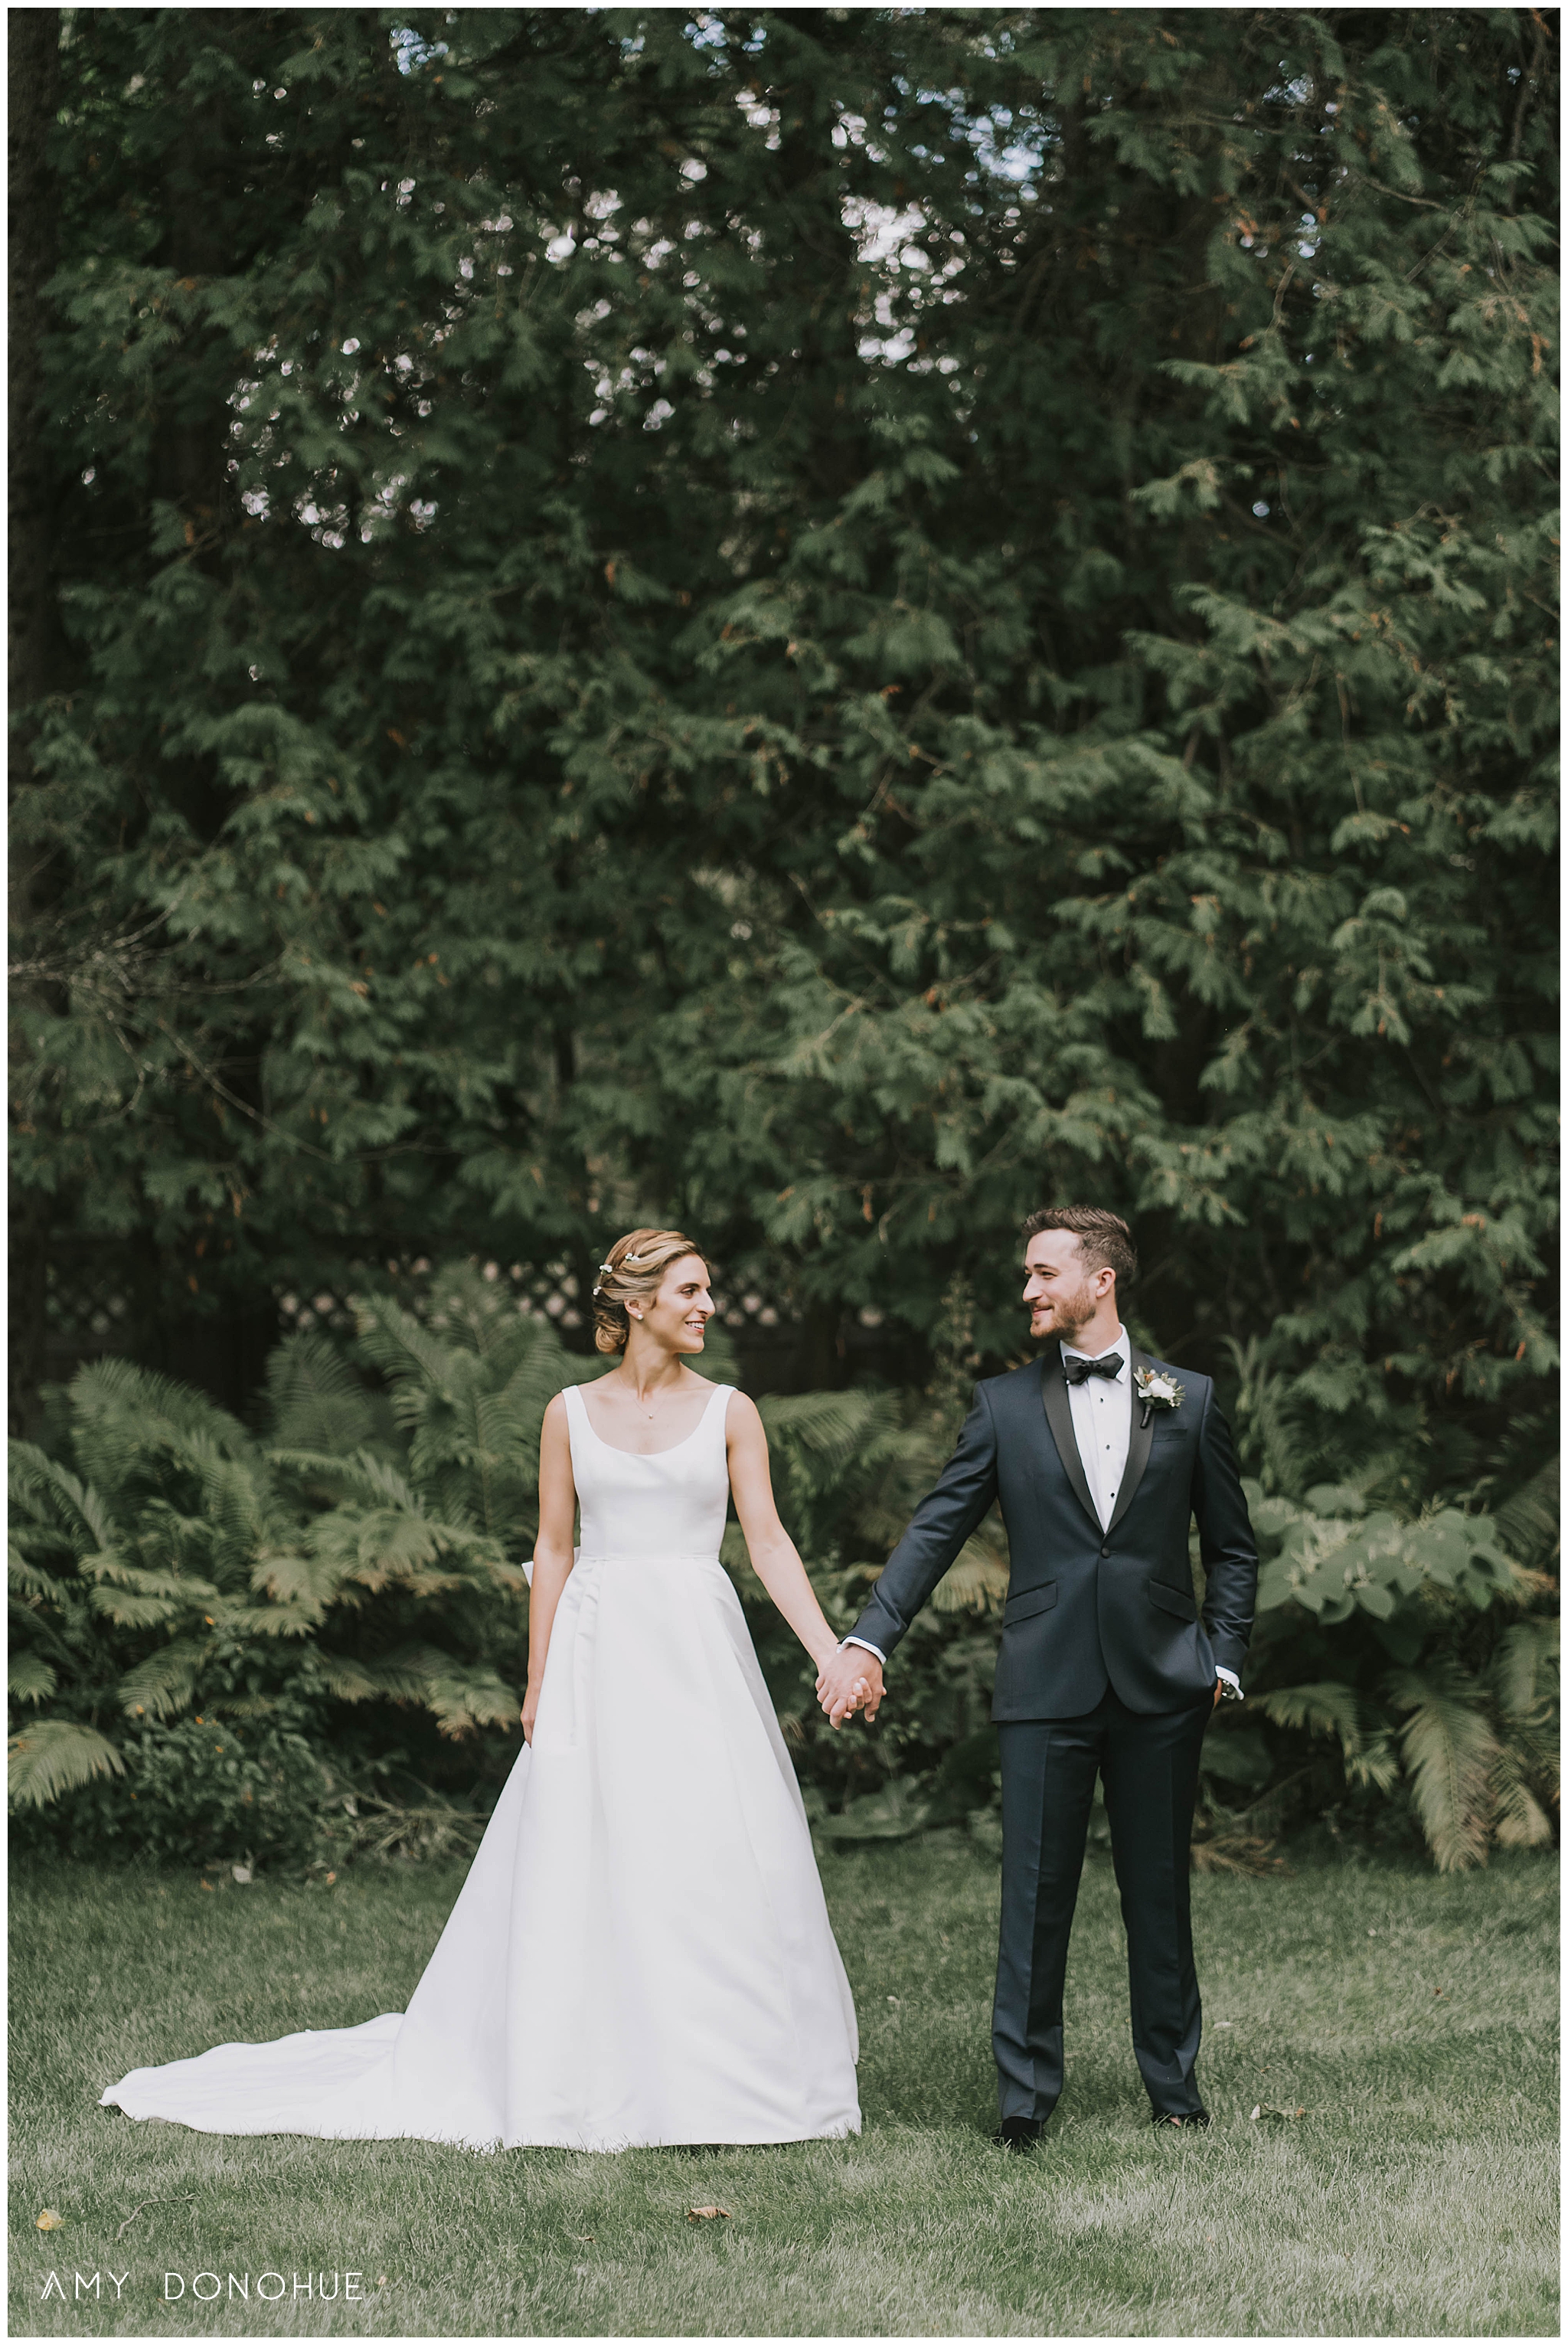 Bride and Groom Portraits | Blue Horse Inn & Resort | Vermont Wedding Photographer | © Amy Donohue Photography